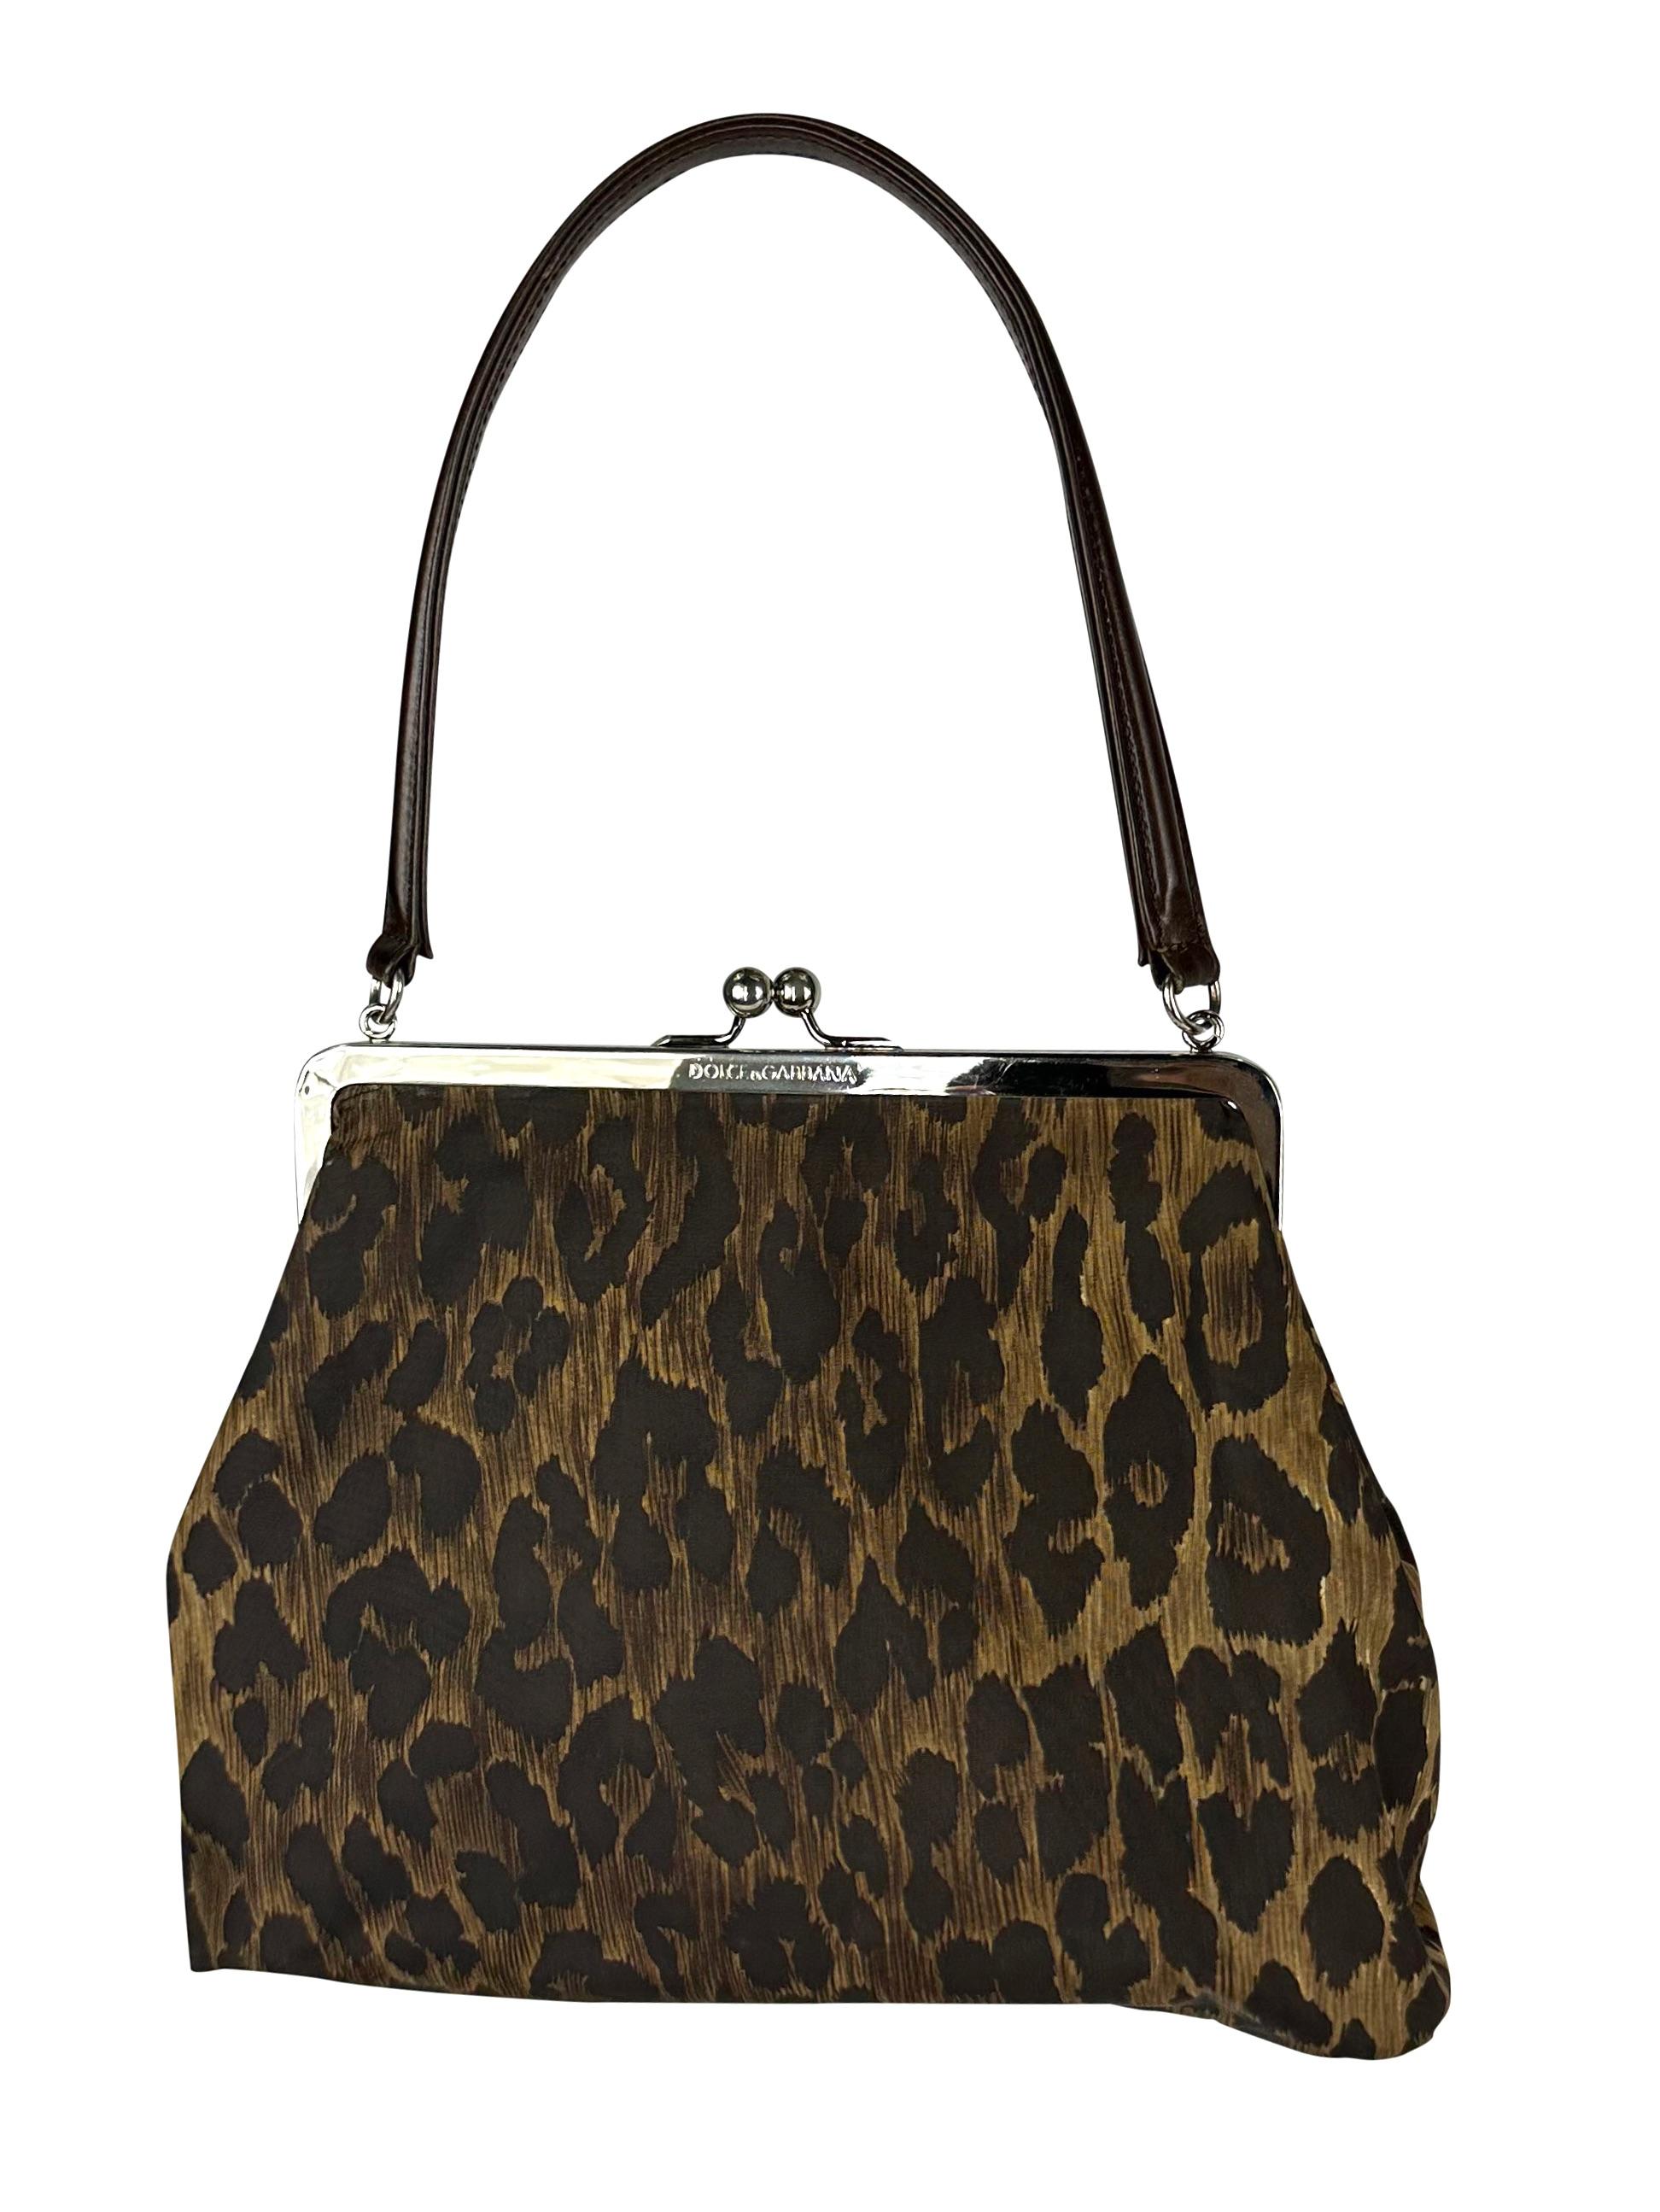 Presenting an incredible leopard print Dolce and Gabbana kiss lock bag. From the late 1990s, this nylon bag features a cheetah print throughout and is made complete with a silverplate logo clam closure.

Approximate Measurements: 
Handle Drop: